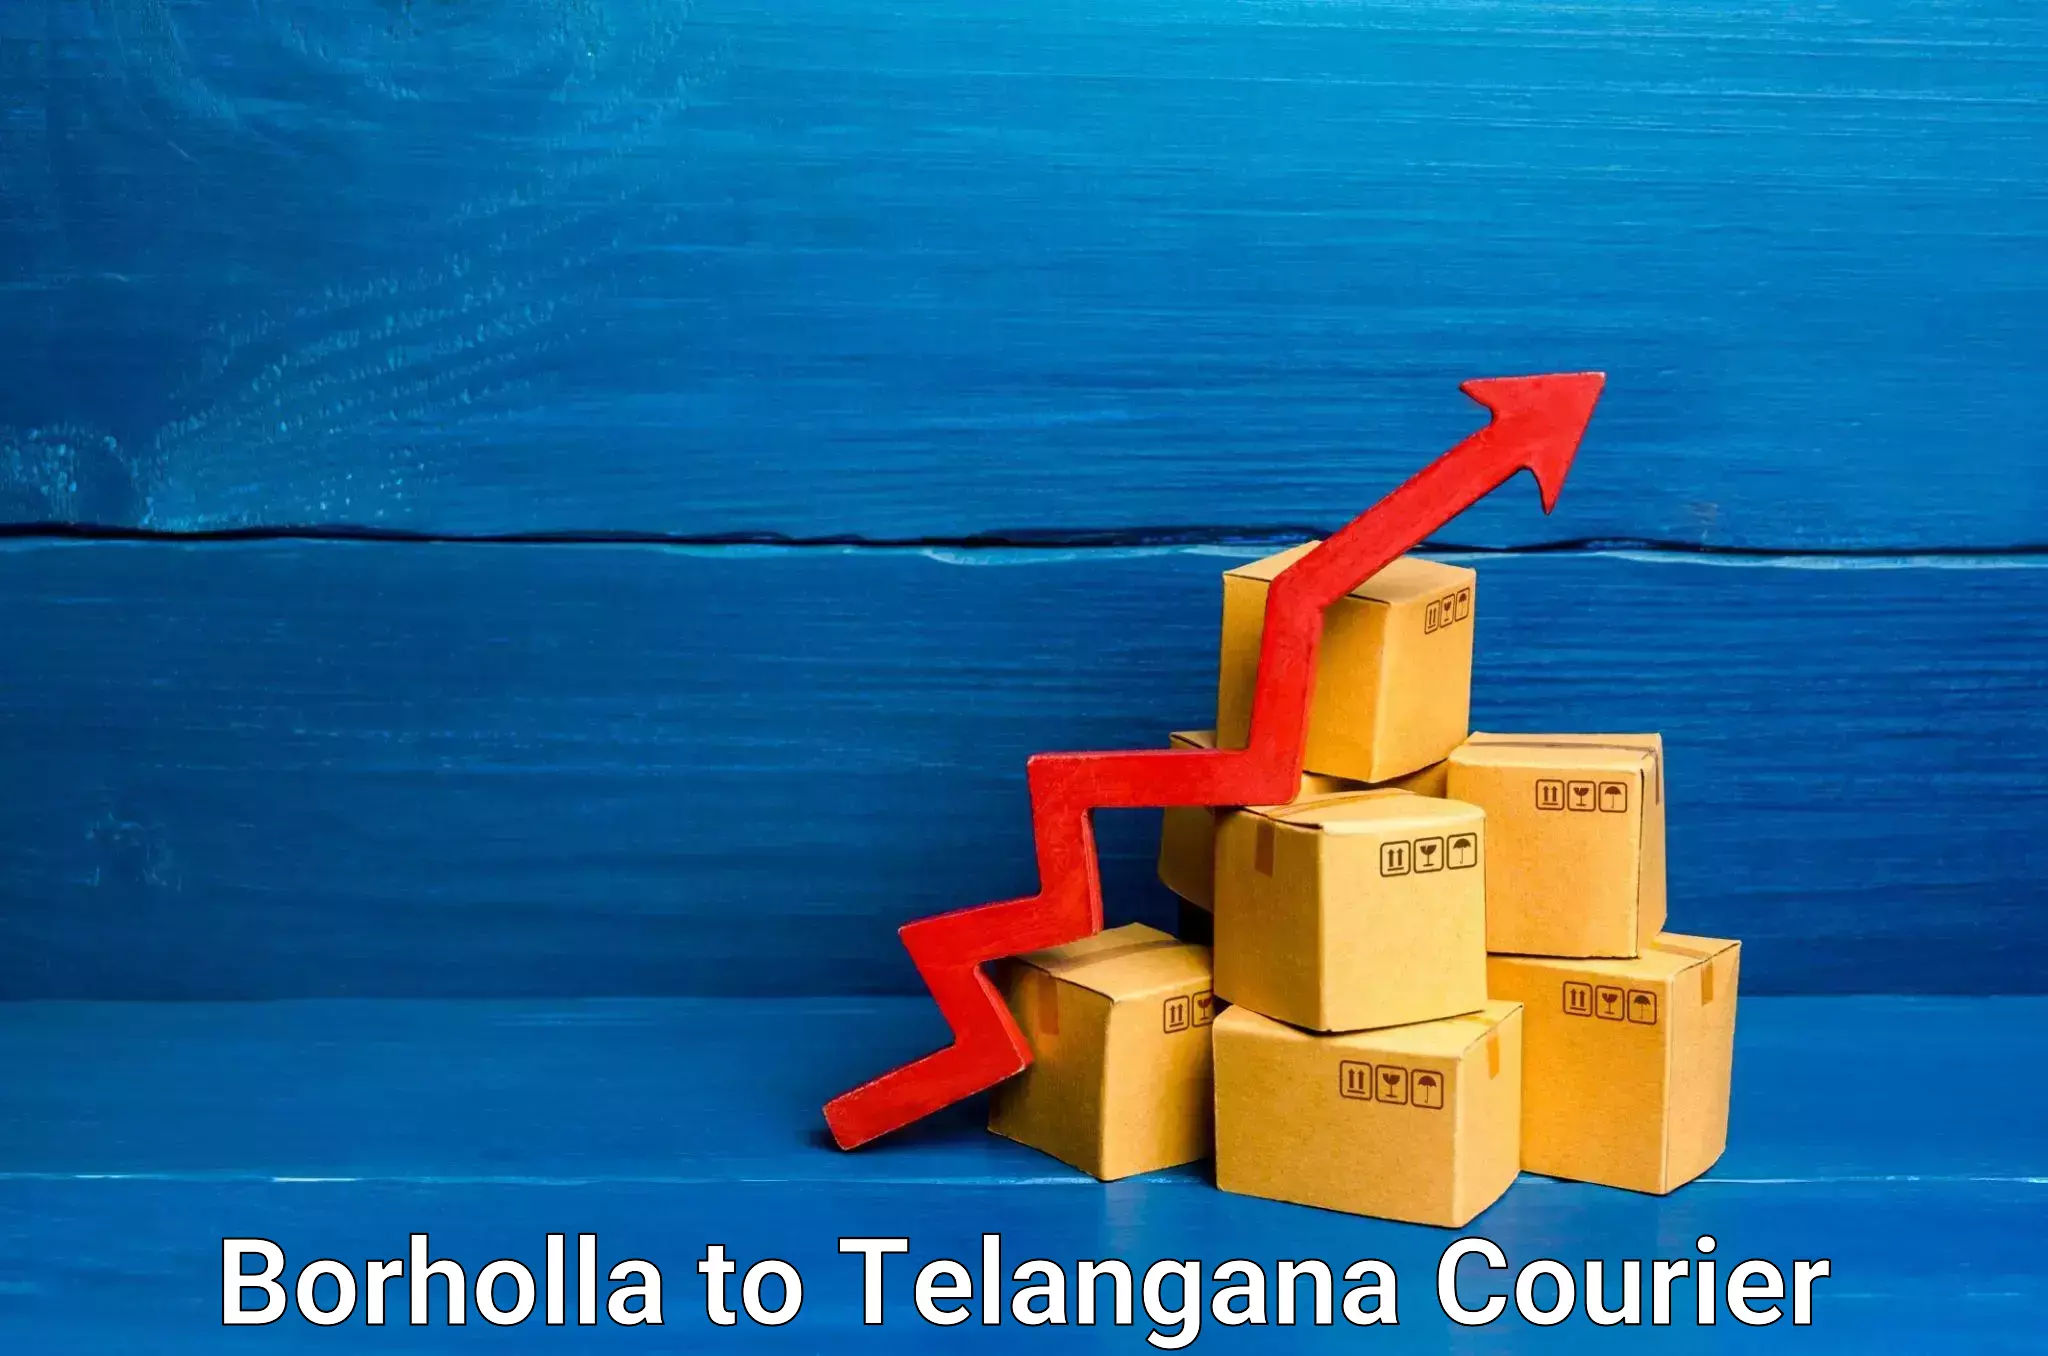 Courier rate comparison in Borholla to Telangana